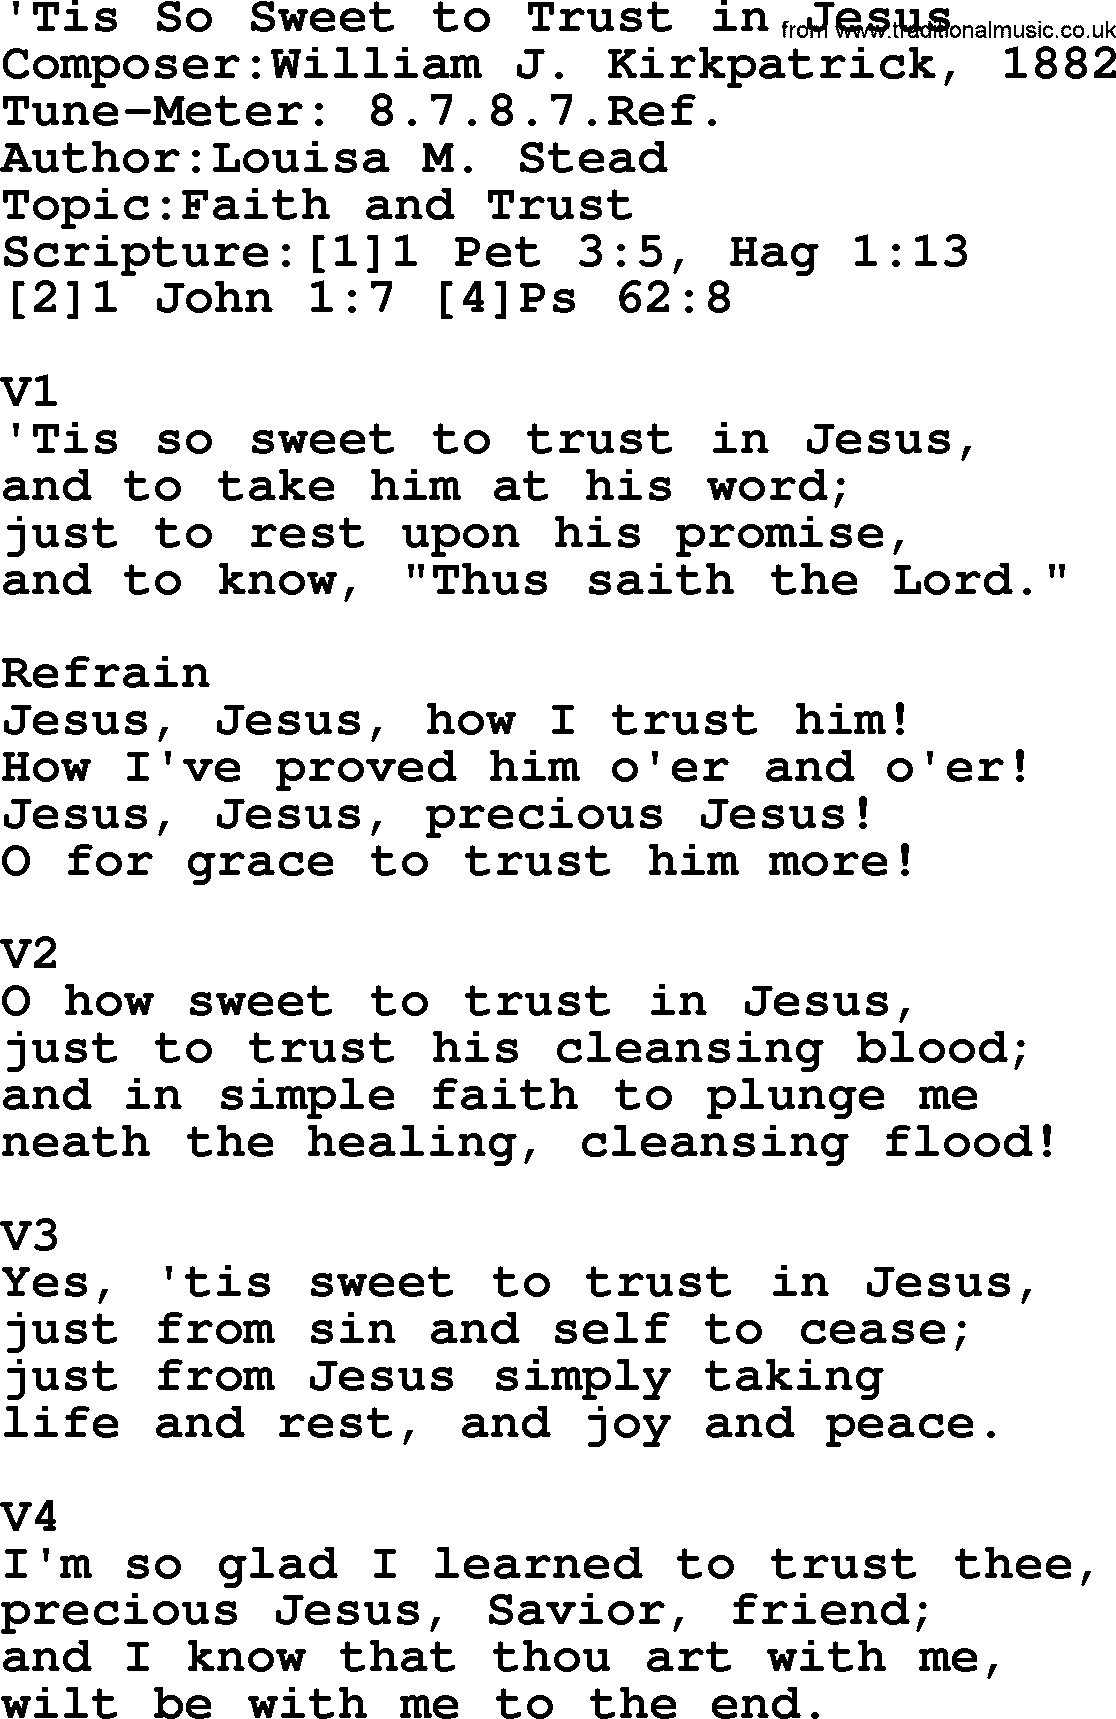 Adventist Hynms collection, Hymn: Tis So Sweet To Trust In Jesus, lyrics with PDF